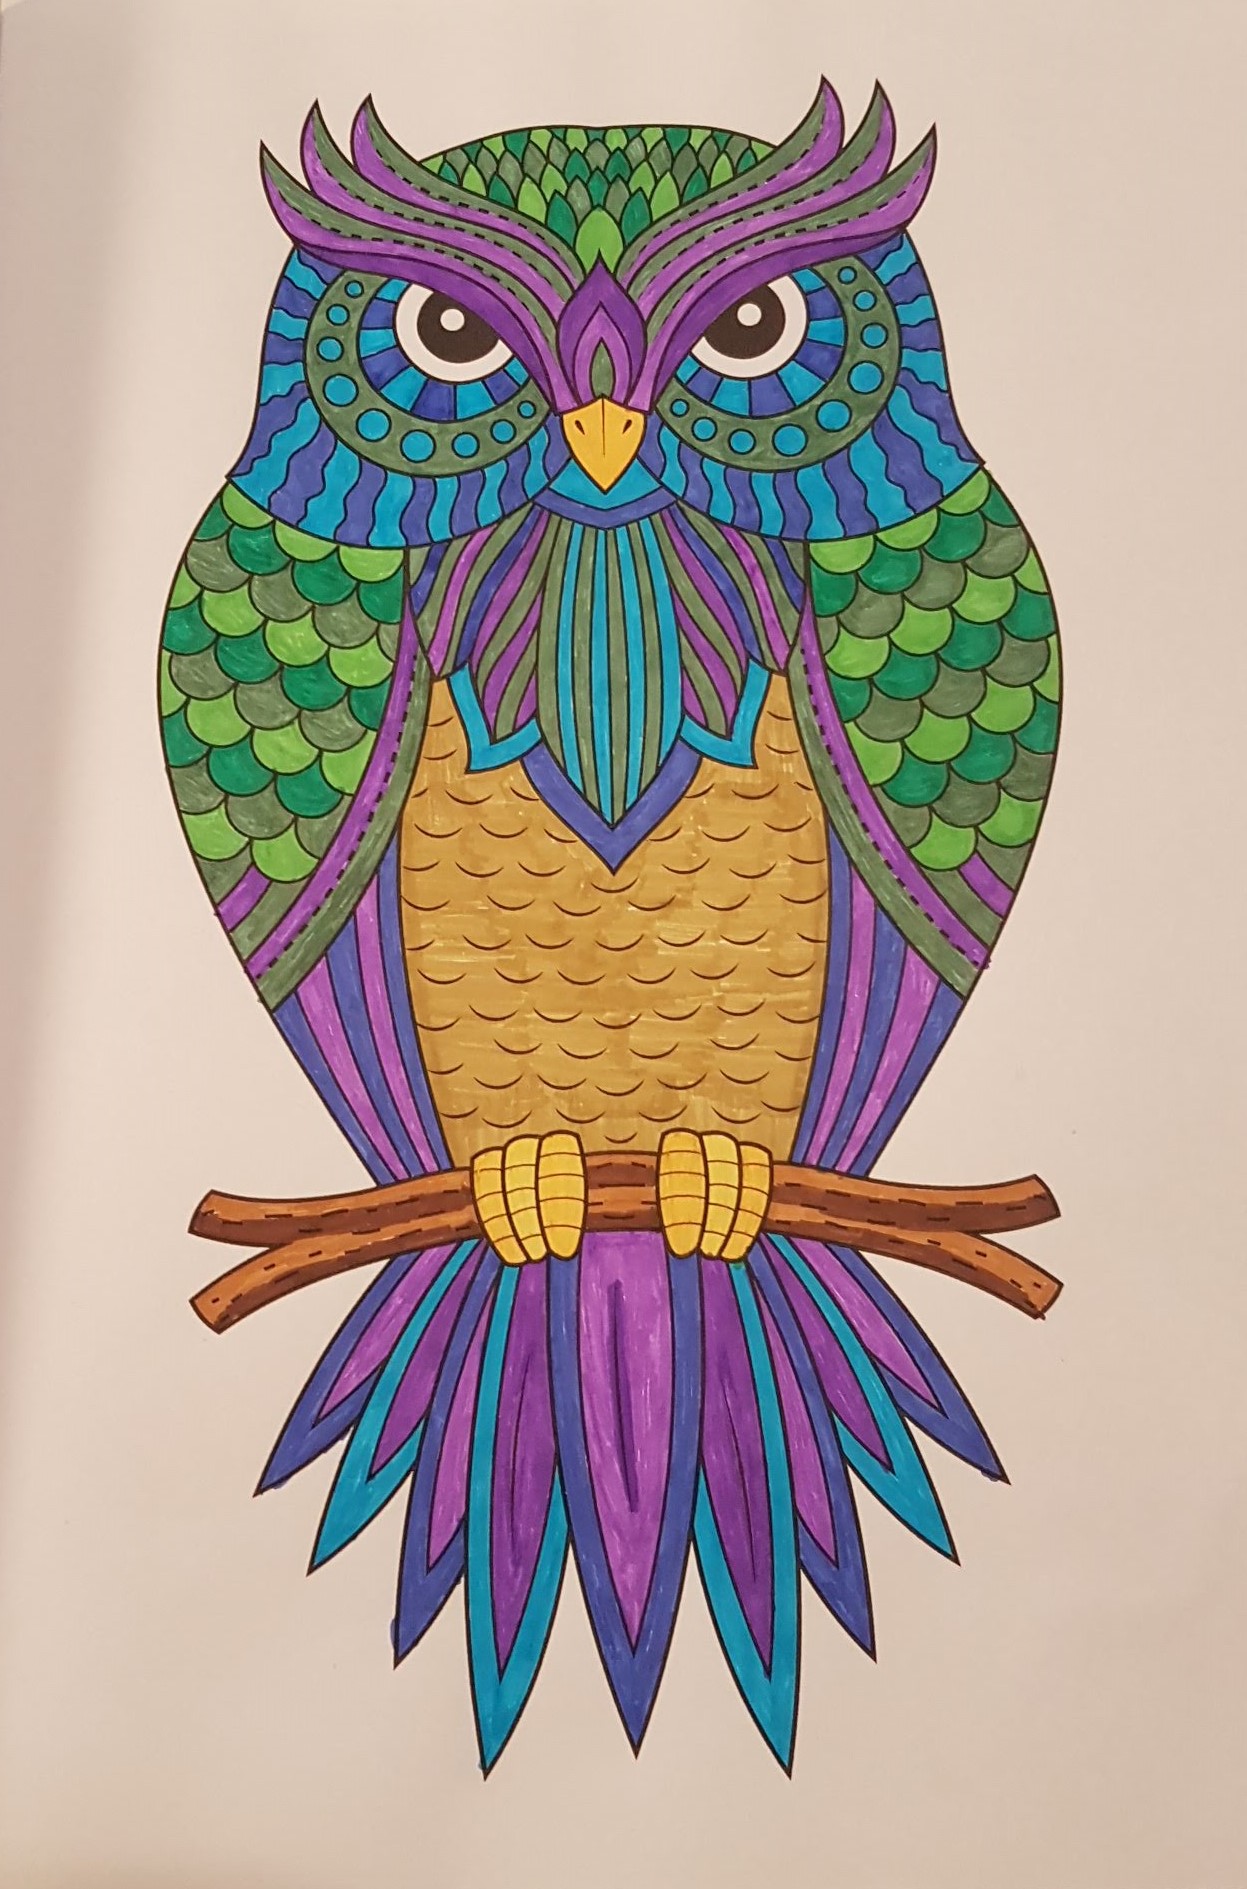 Owl with green head and wing feathers, purple eyebrows, blue markings around its eyes and purple tail feathers with some blue streaks, sitting on a branch and looking at you.